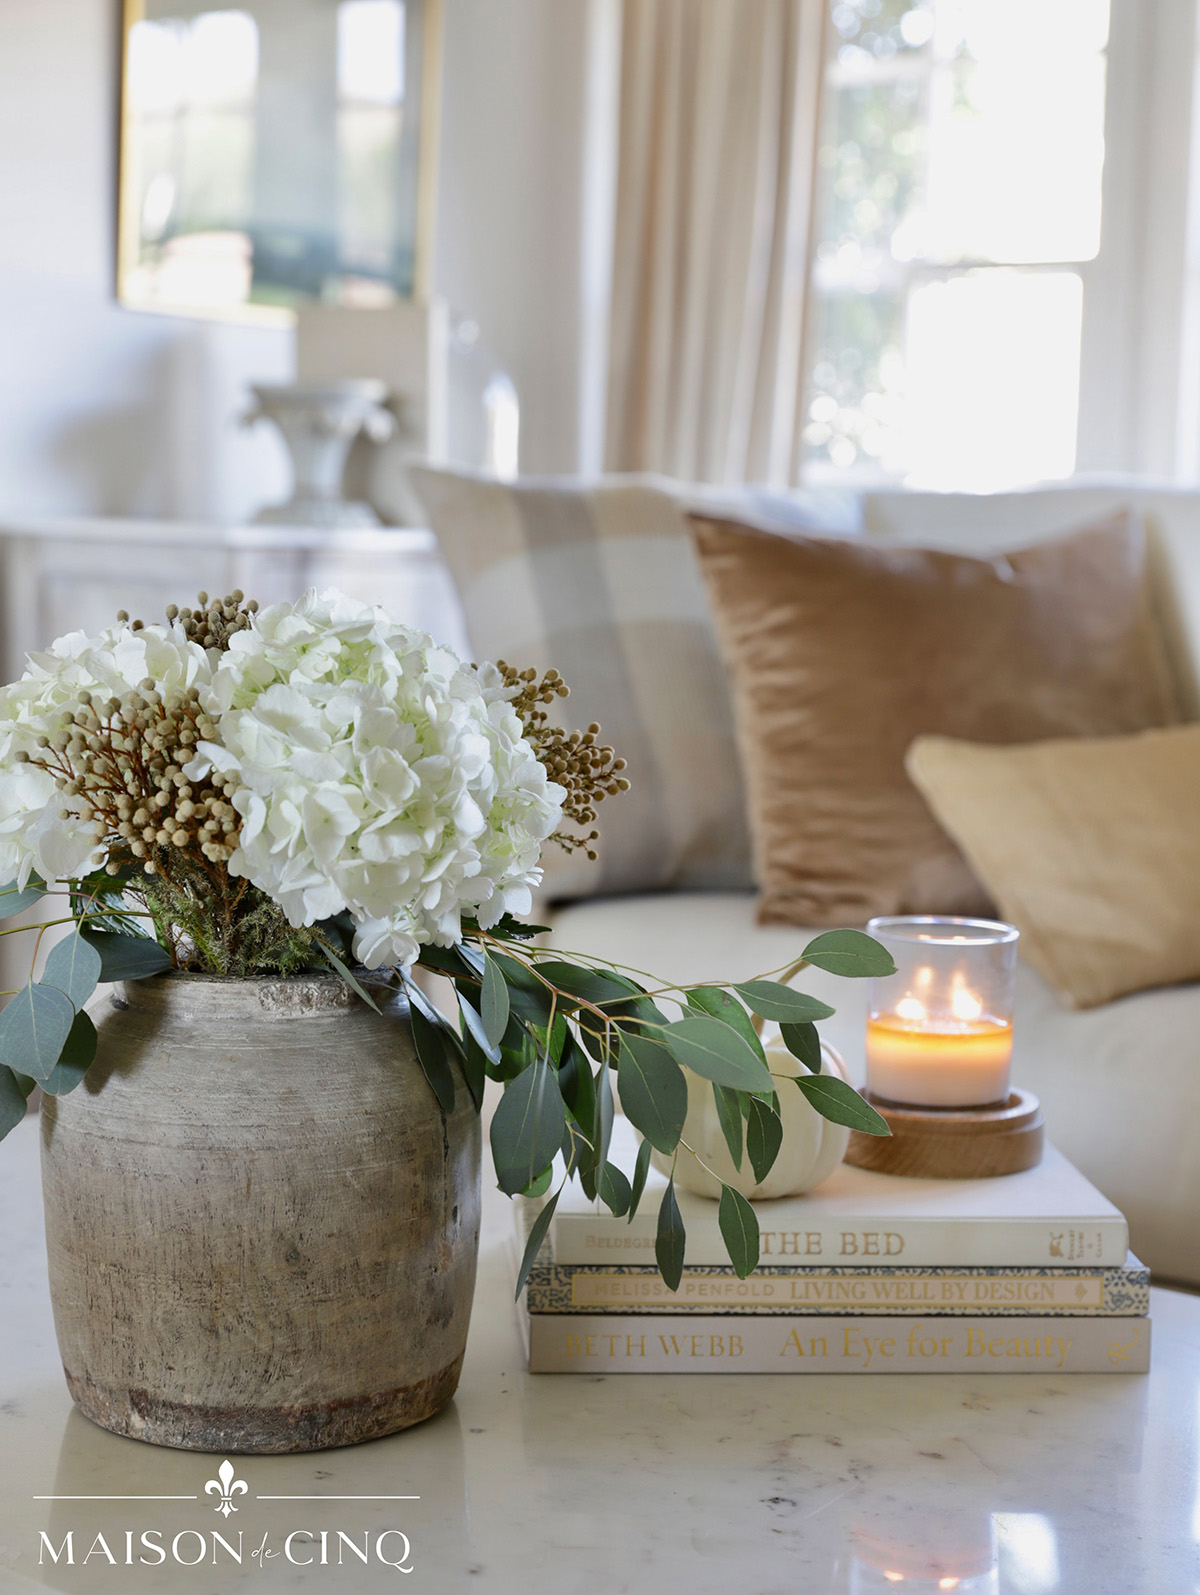 How to Style Coffee Table Books + My Top 20 Favorites